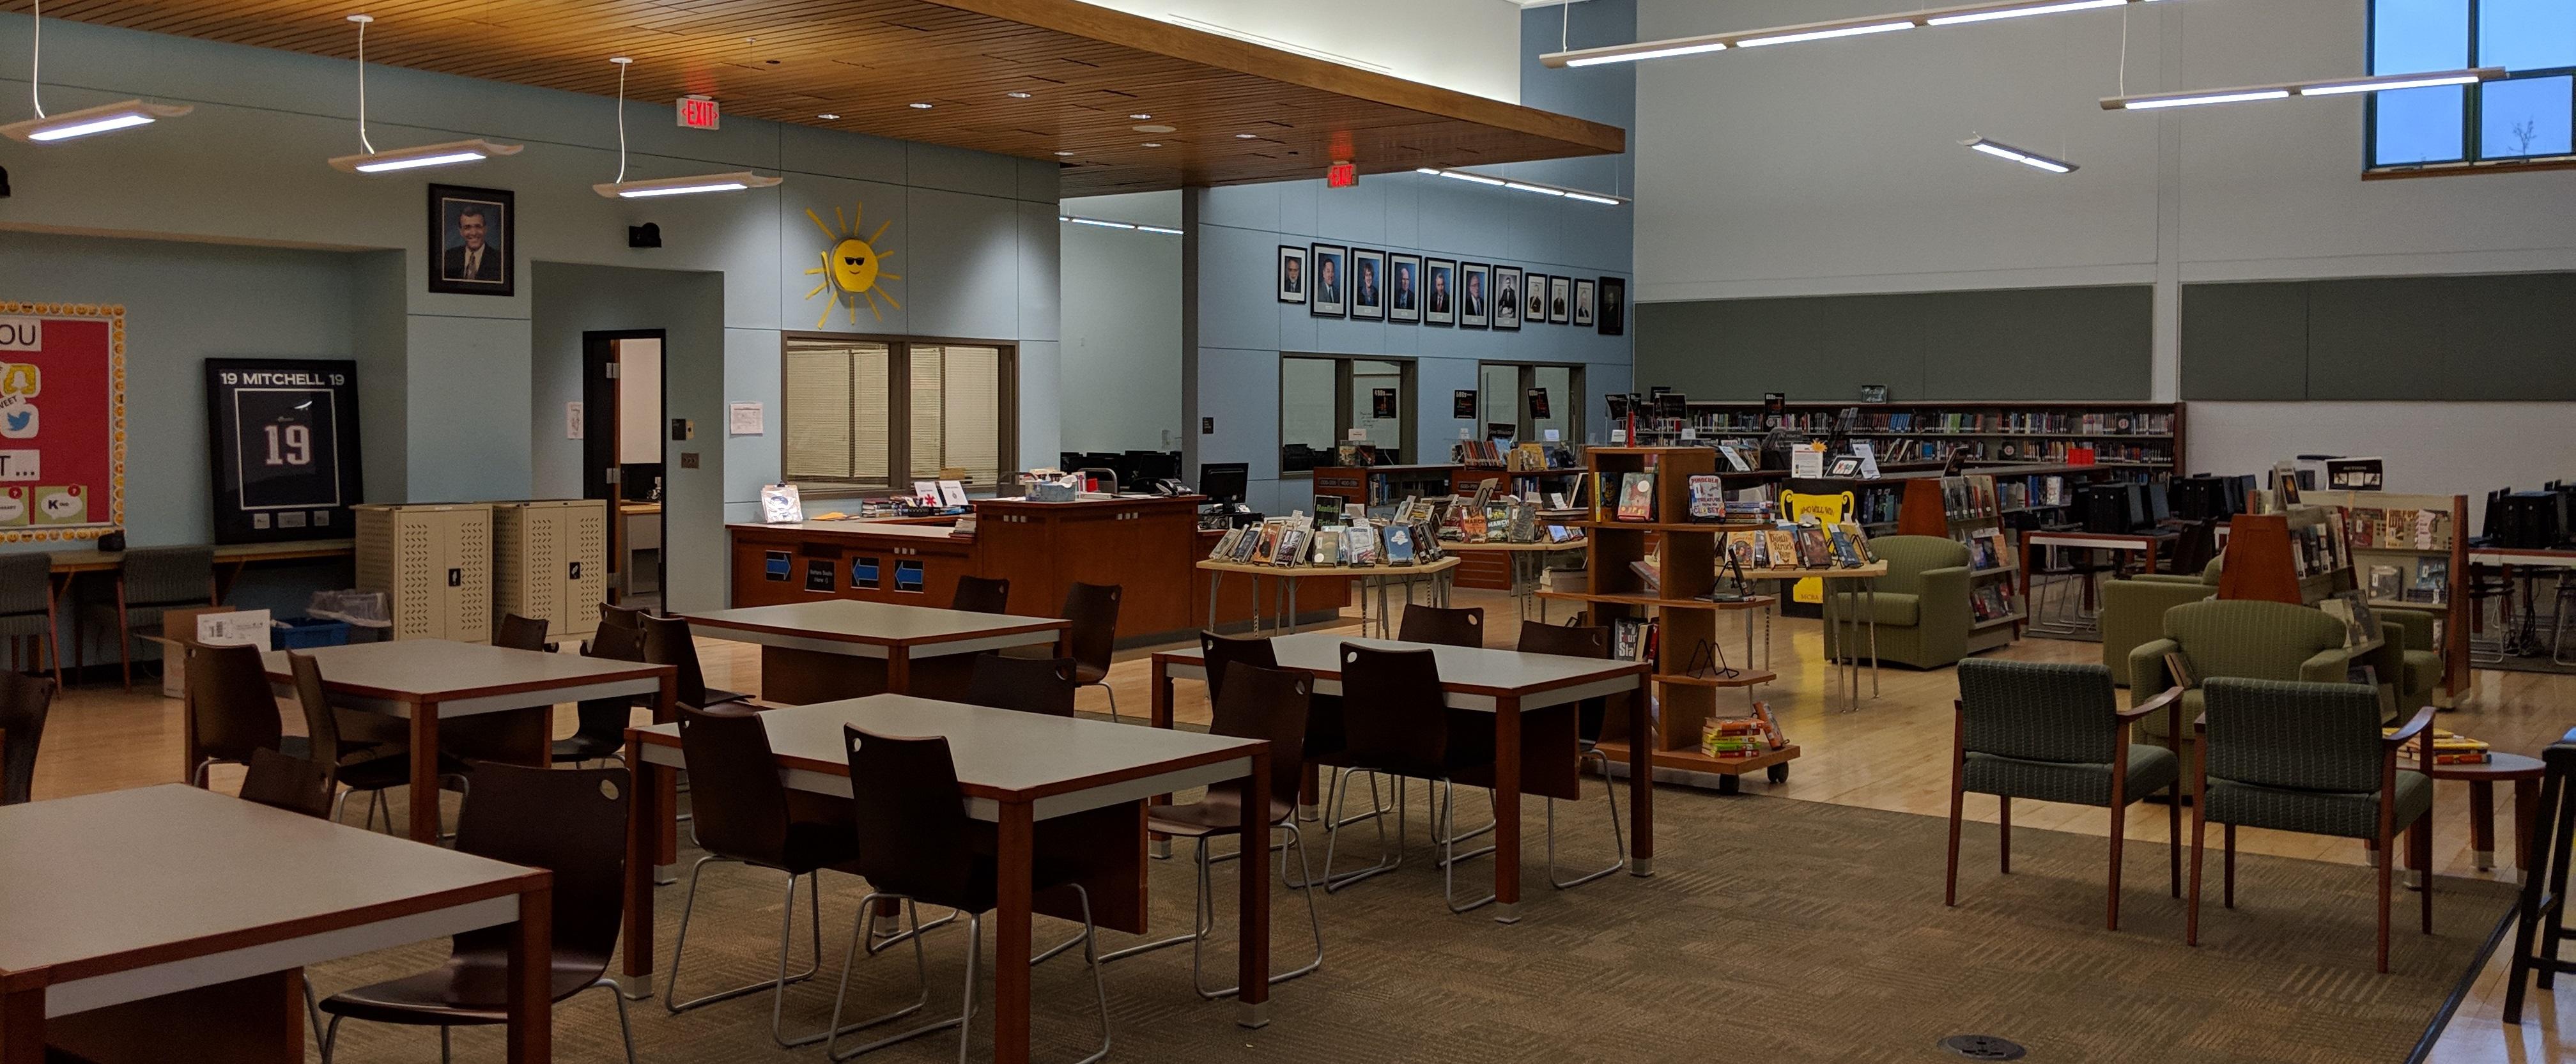 Image of the CMS Library.